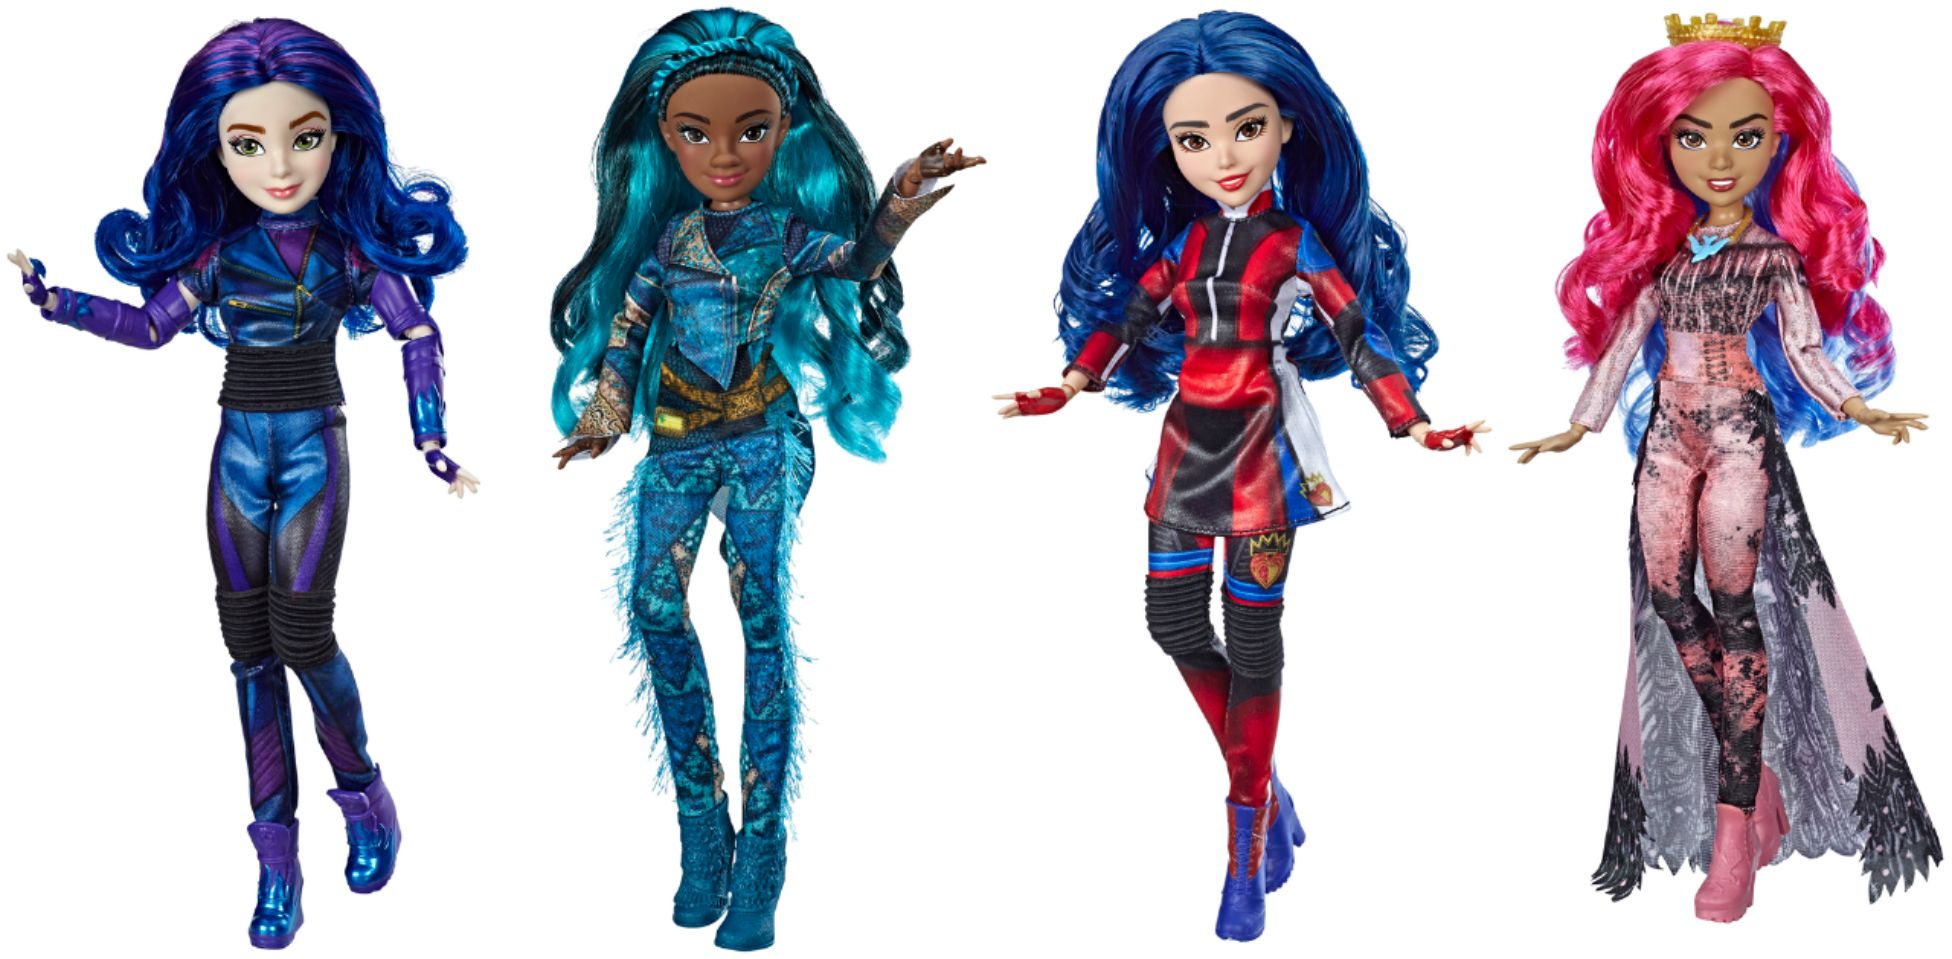 clothes and accessories made for disney descendants dolls  